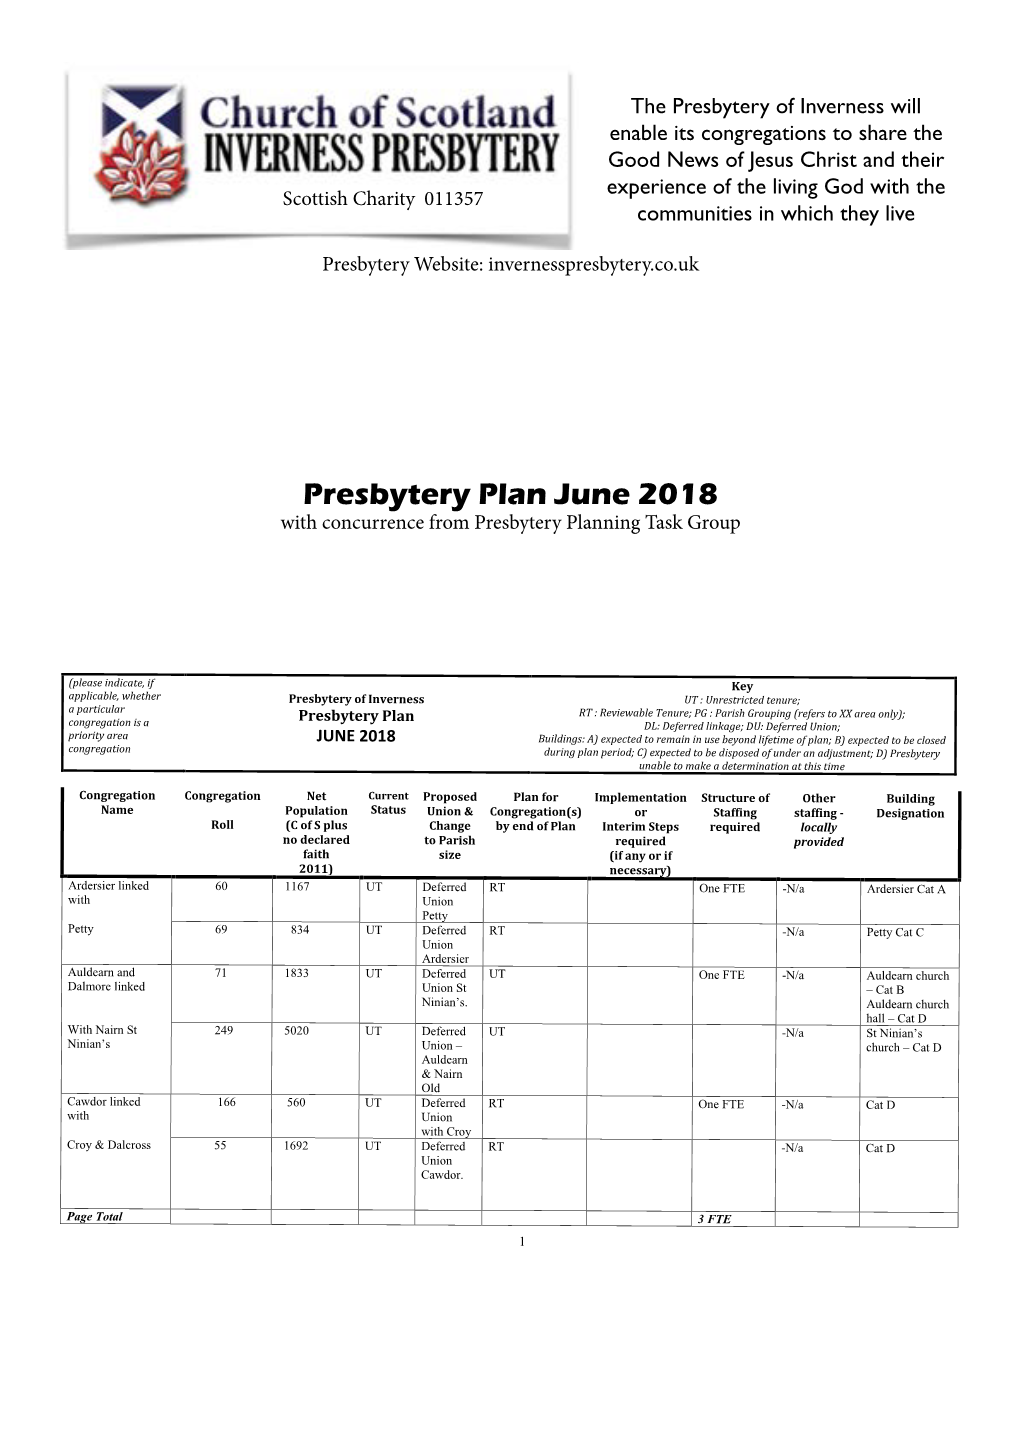 Presbytery Plan June 2018 with Concurrence from Presbytery Planning Task Group